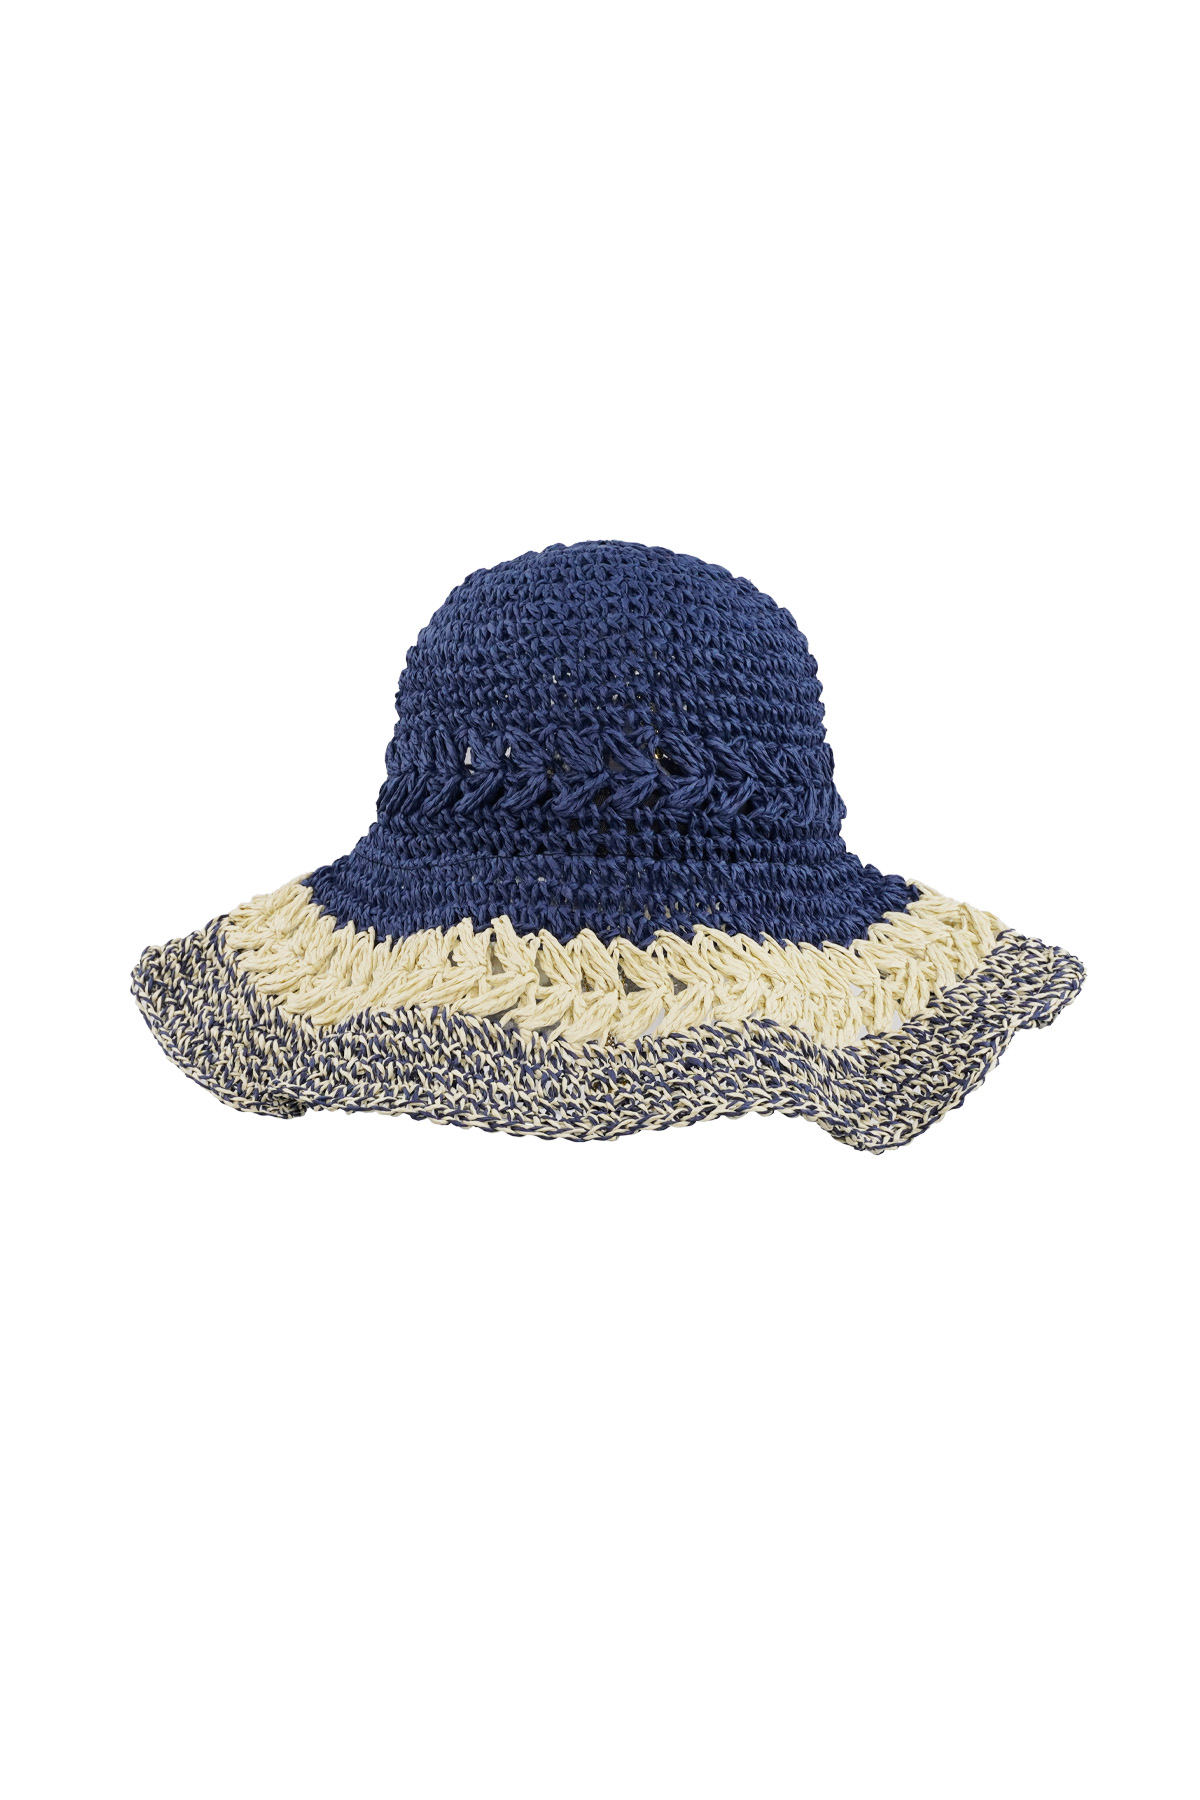 Braided hat with layers - navy blue h5 